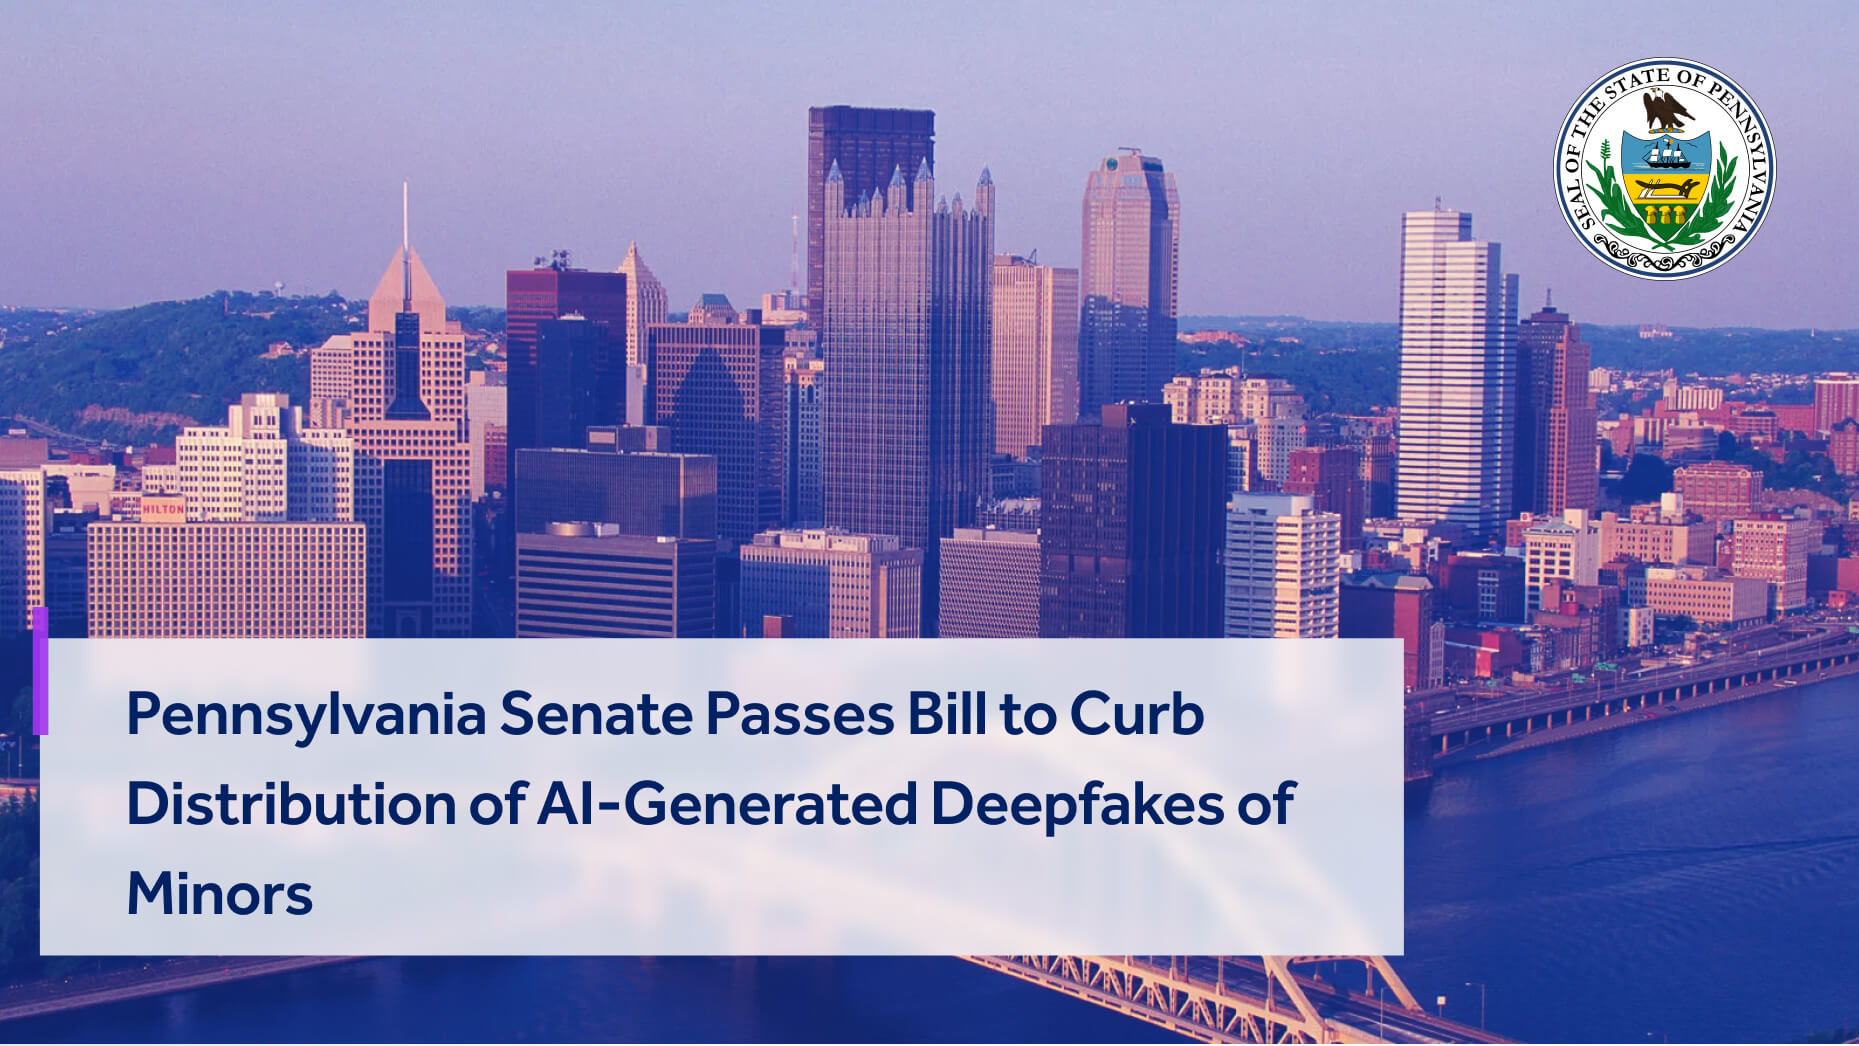 This featured image is related to the news on Senate Bill 12313 passed by the Pennsylvania Senate to combat the sharing of AI-generated explicit images of minors.